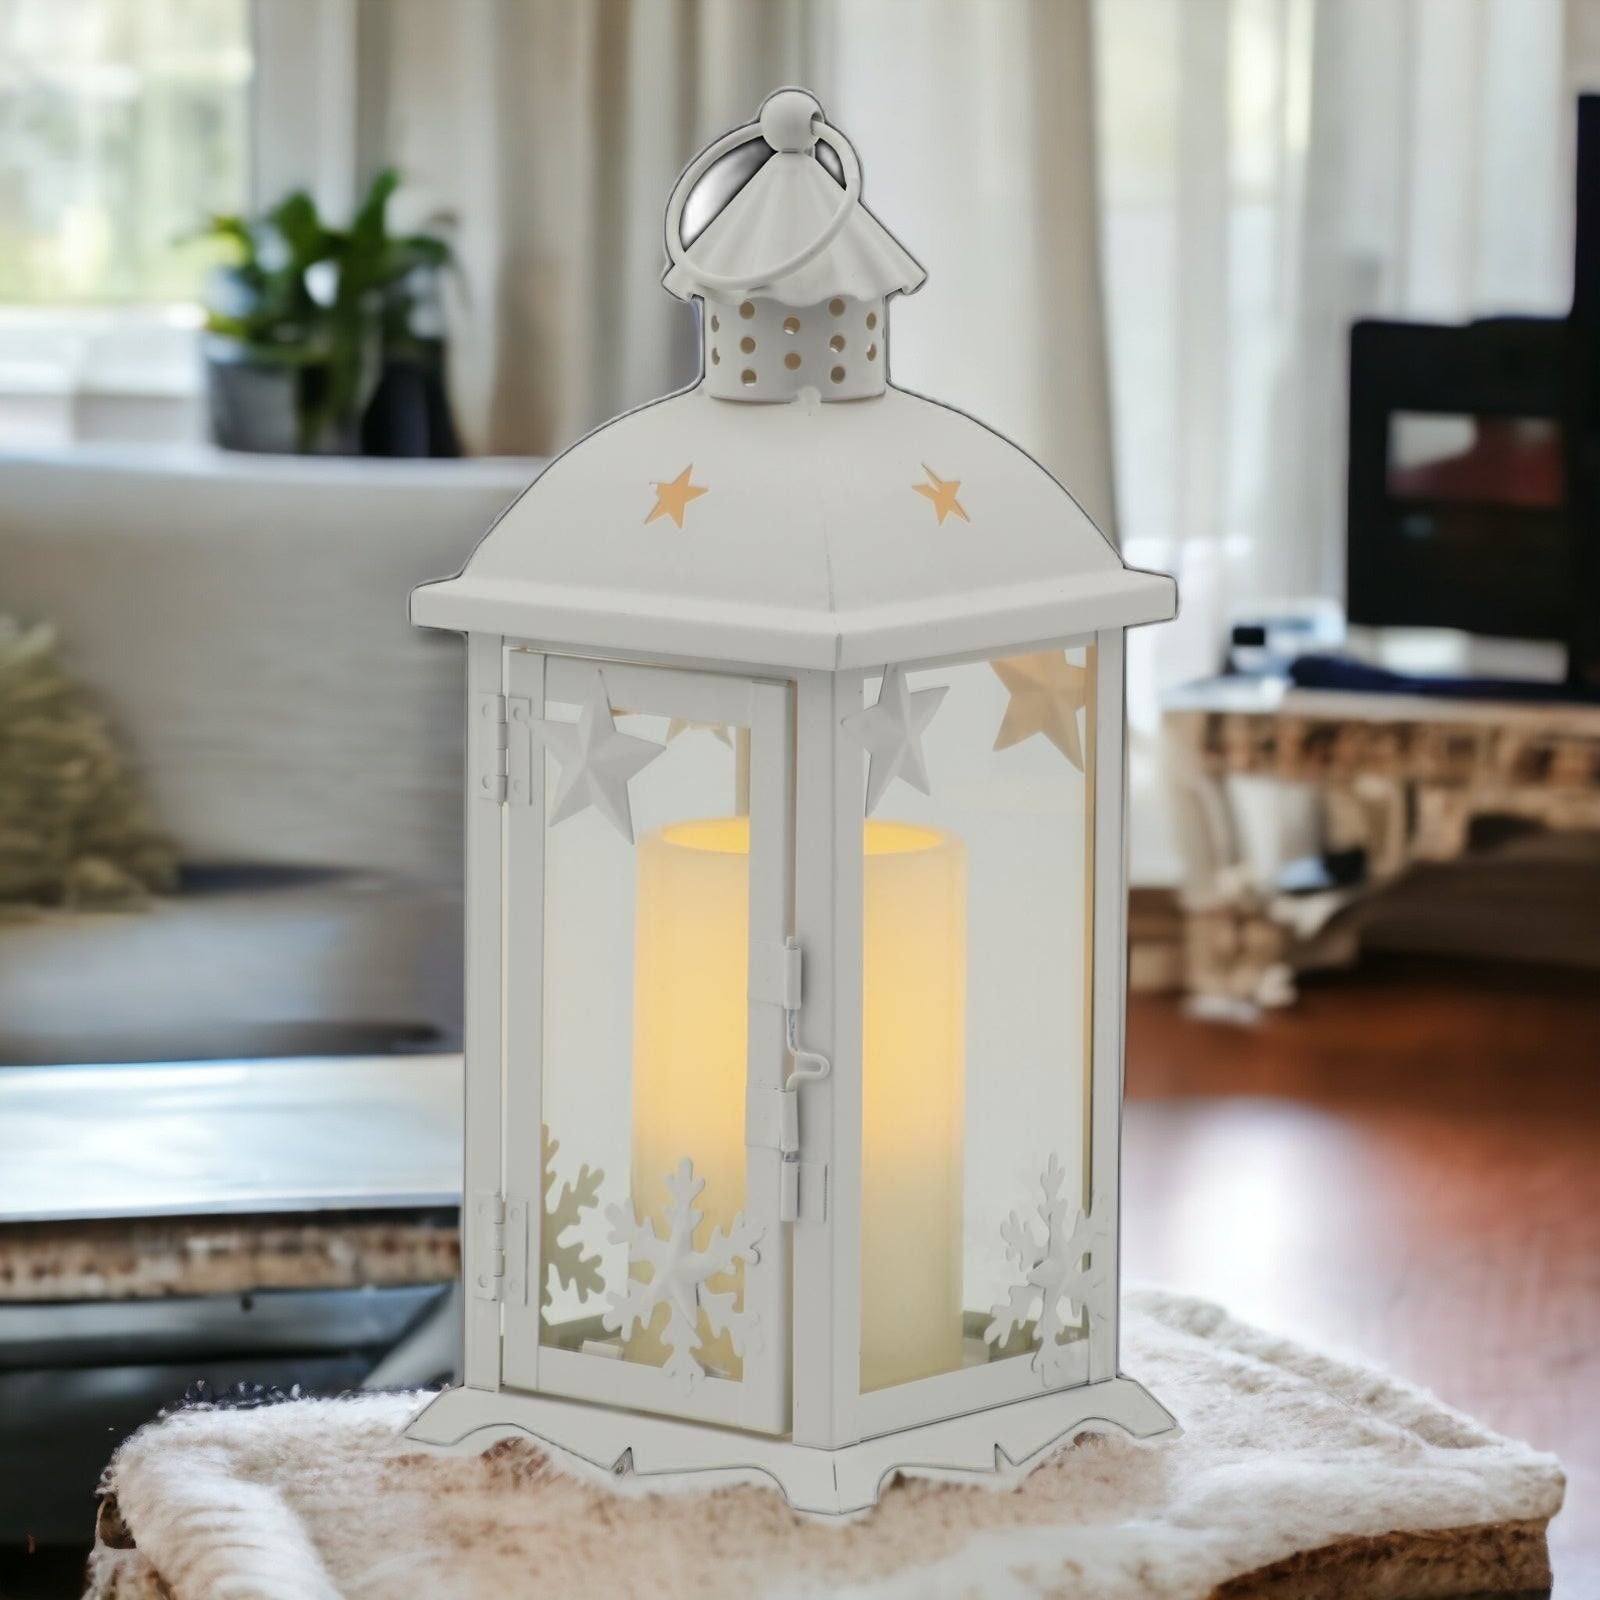 12" White Metal Tabletop Lantern Candle Holder With Candle